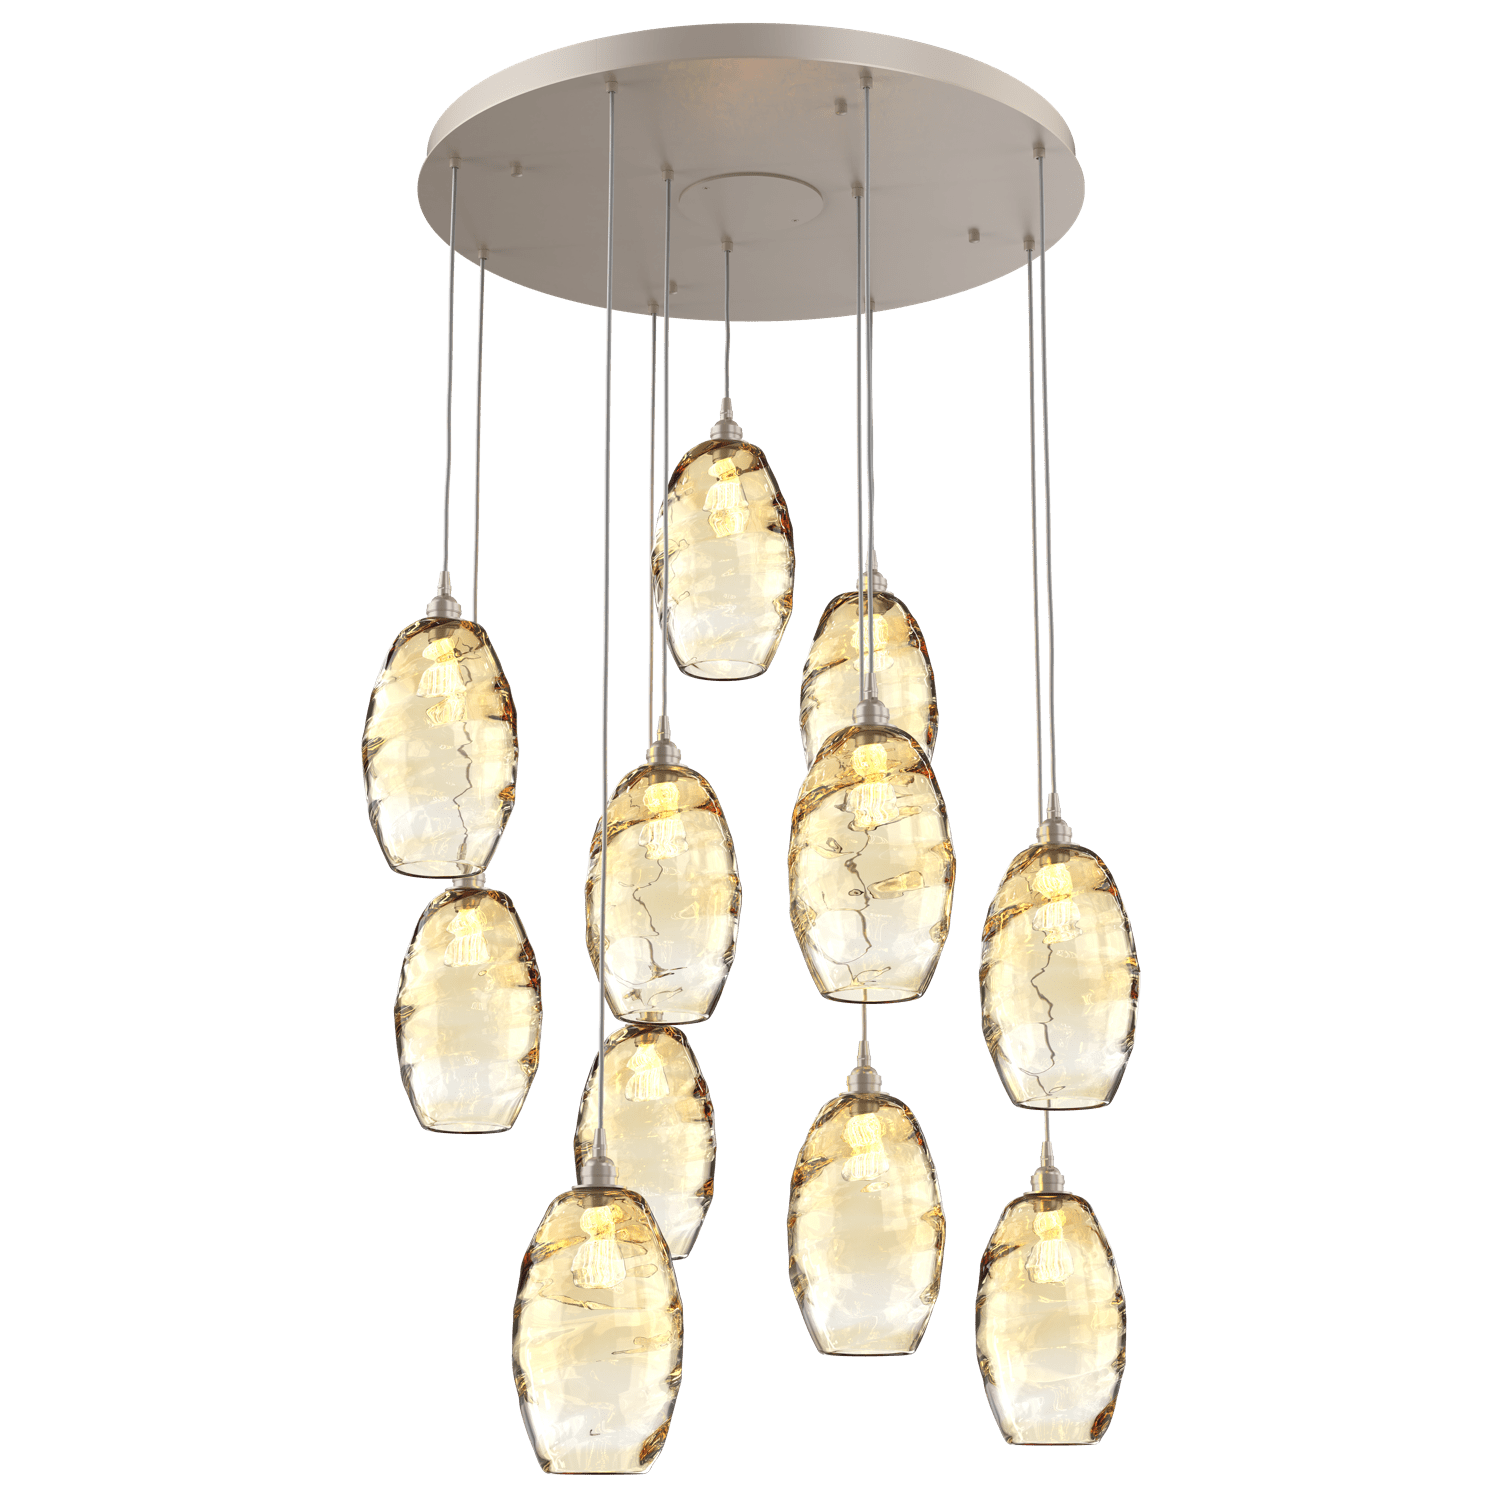 CHB0035-11-BS-OA-Hammerton-Studio-Optic-Blown-Glass-Elisse-11-light-round-pendant-chandelier-with-metallic-beige-silver-finish-and-optic-amber-blown-glass-shades-and-incandescent-lamping